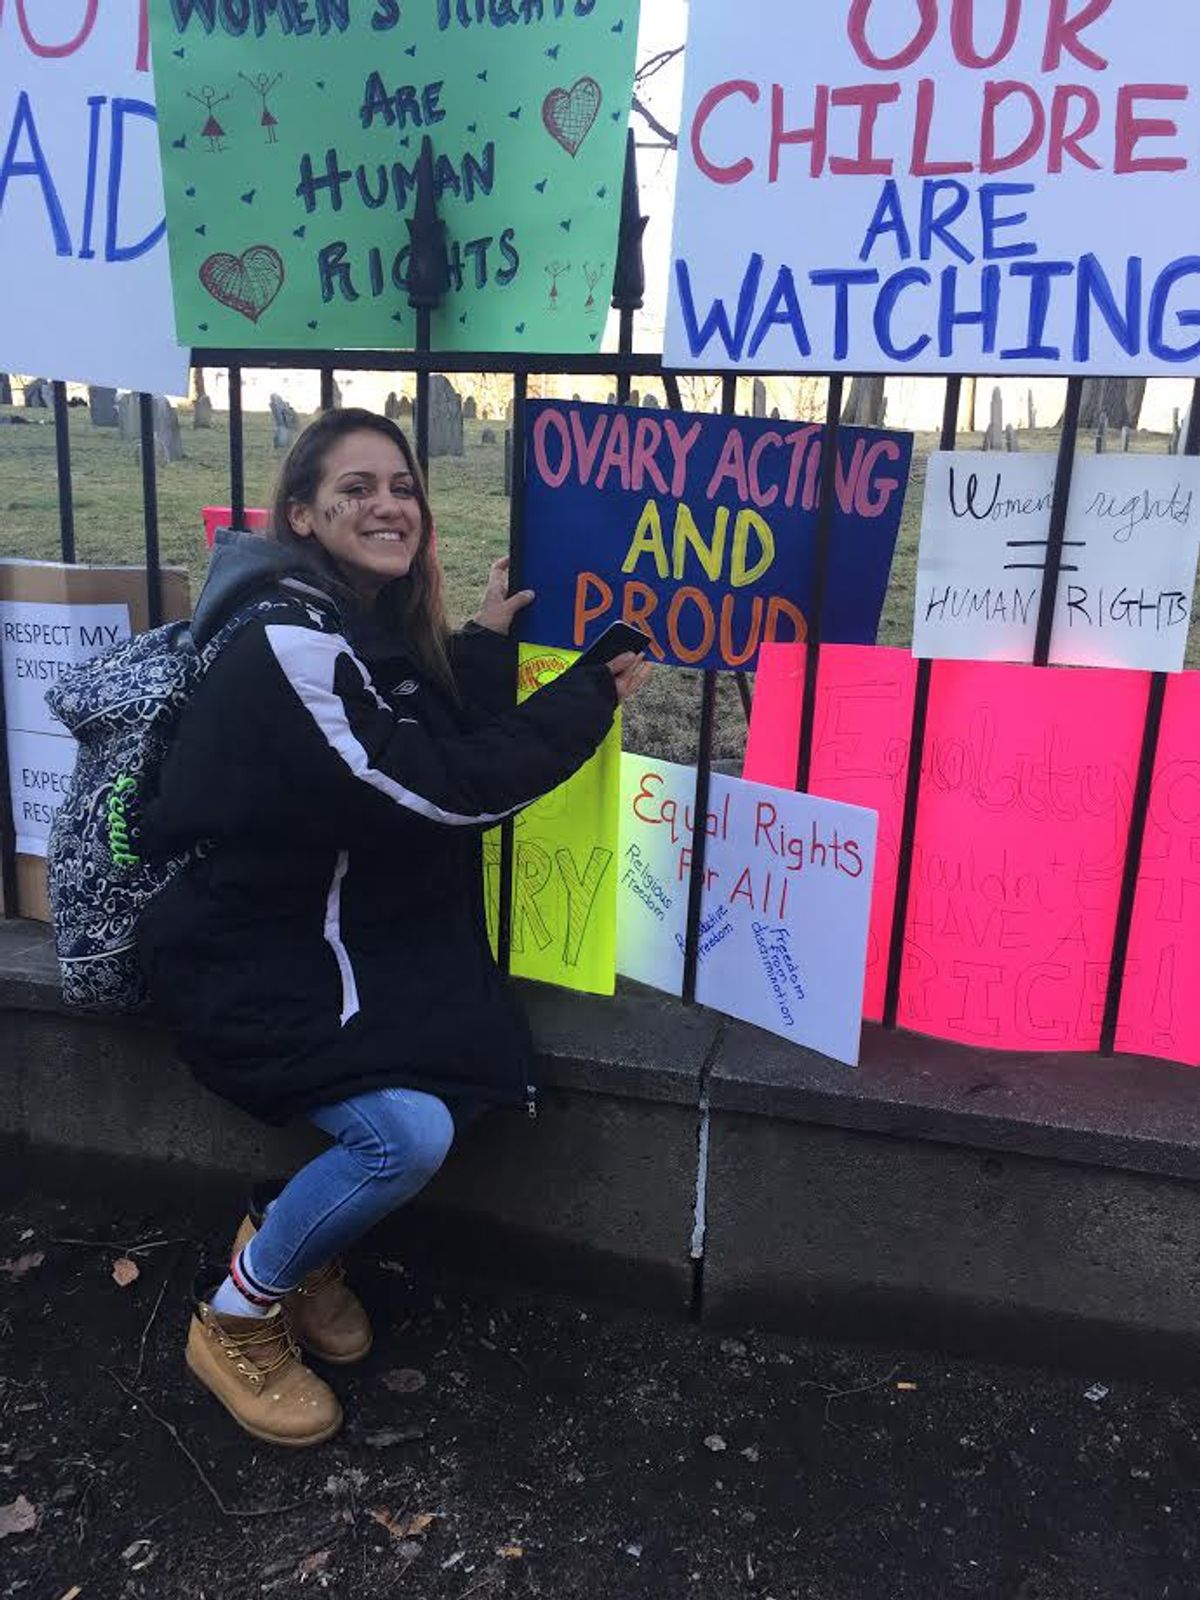 Why I Attended The Woman's March